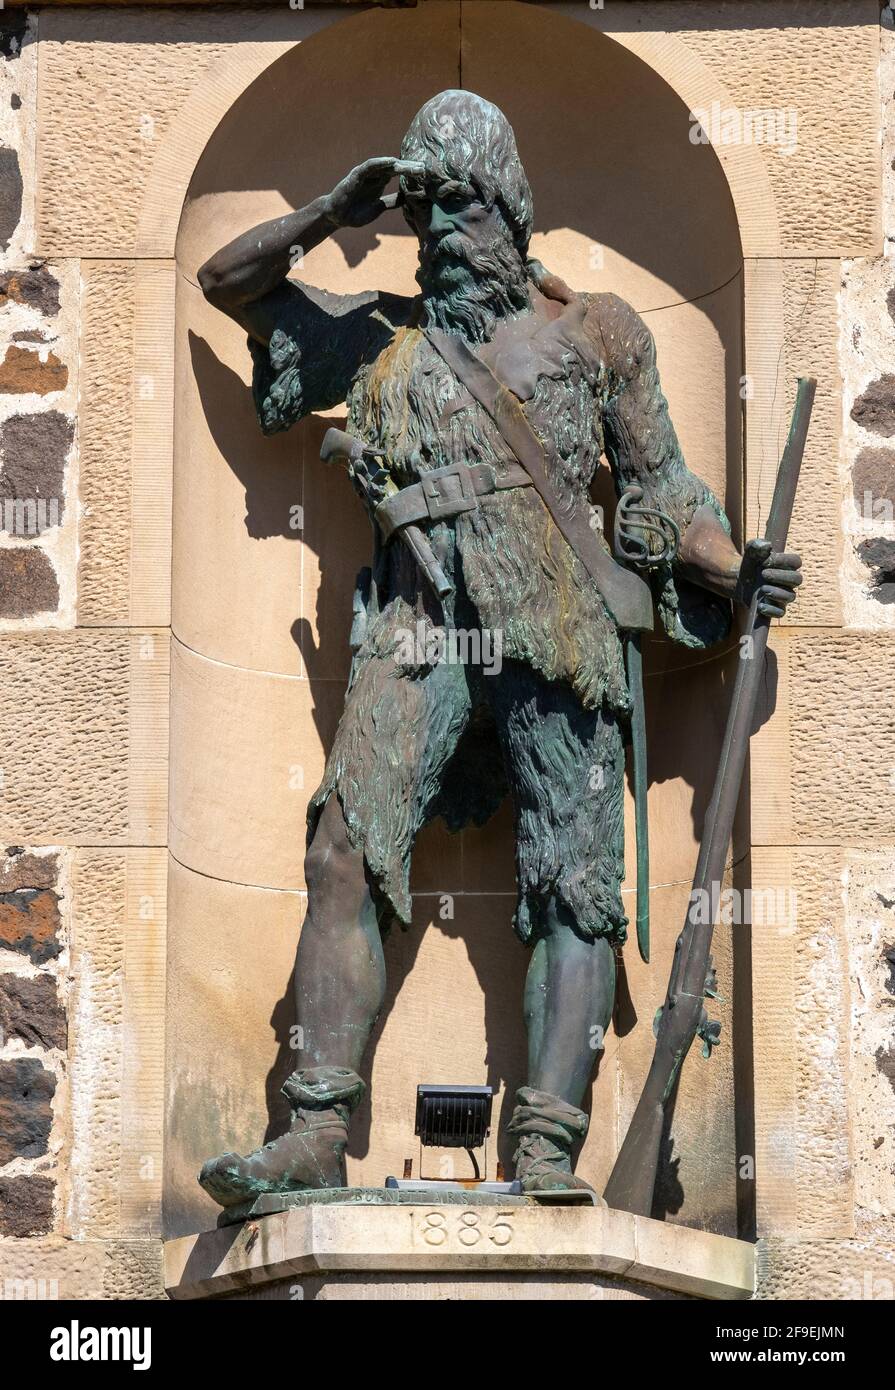 The Robinson Crusoe statue in Lower Largo, Fife. Lower Largo is famed for its links with Alexander Selkirk who was born in the village in 1676. Stock Photo